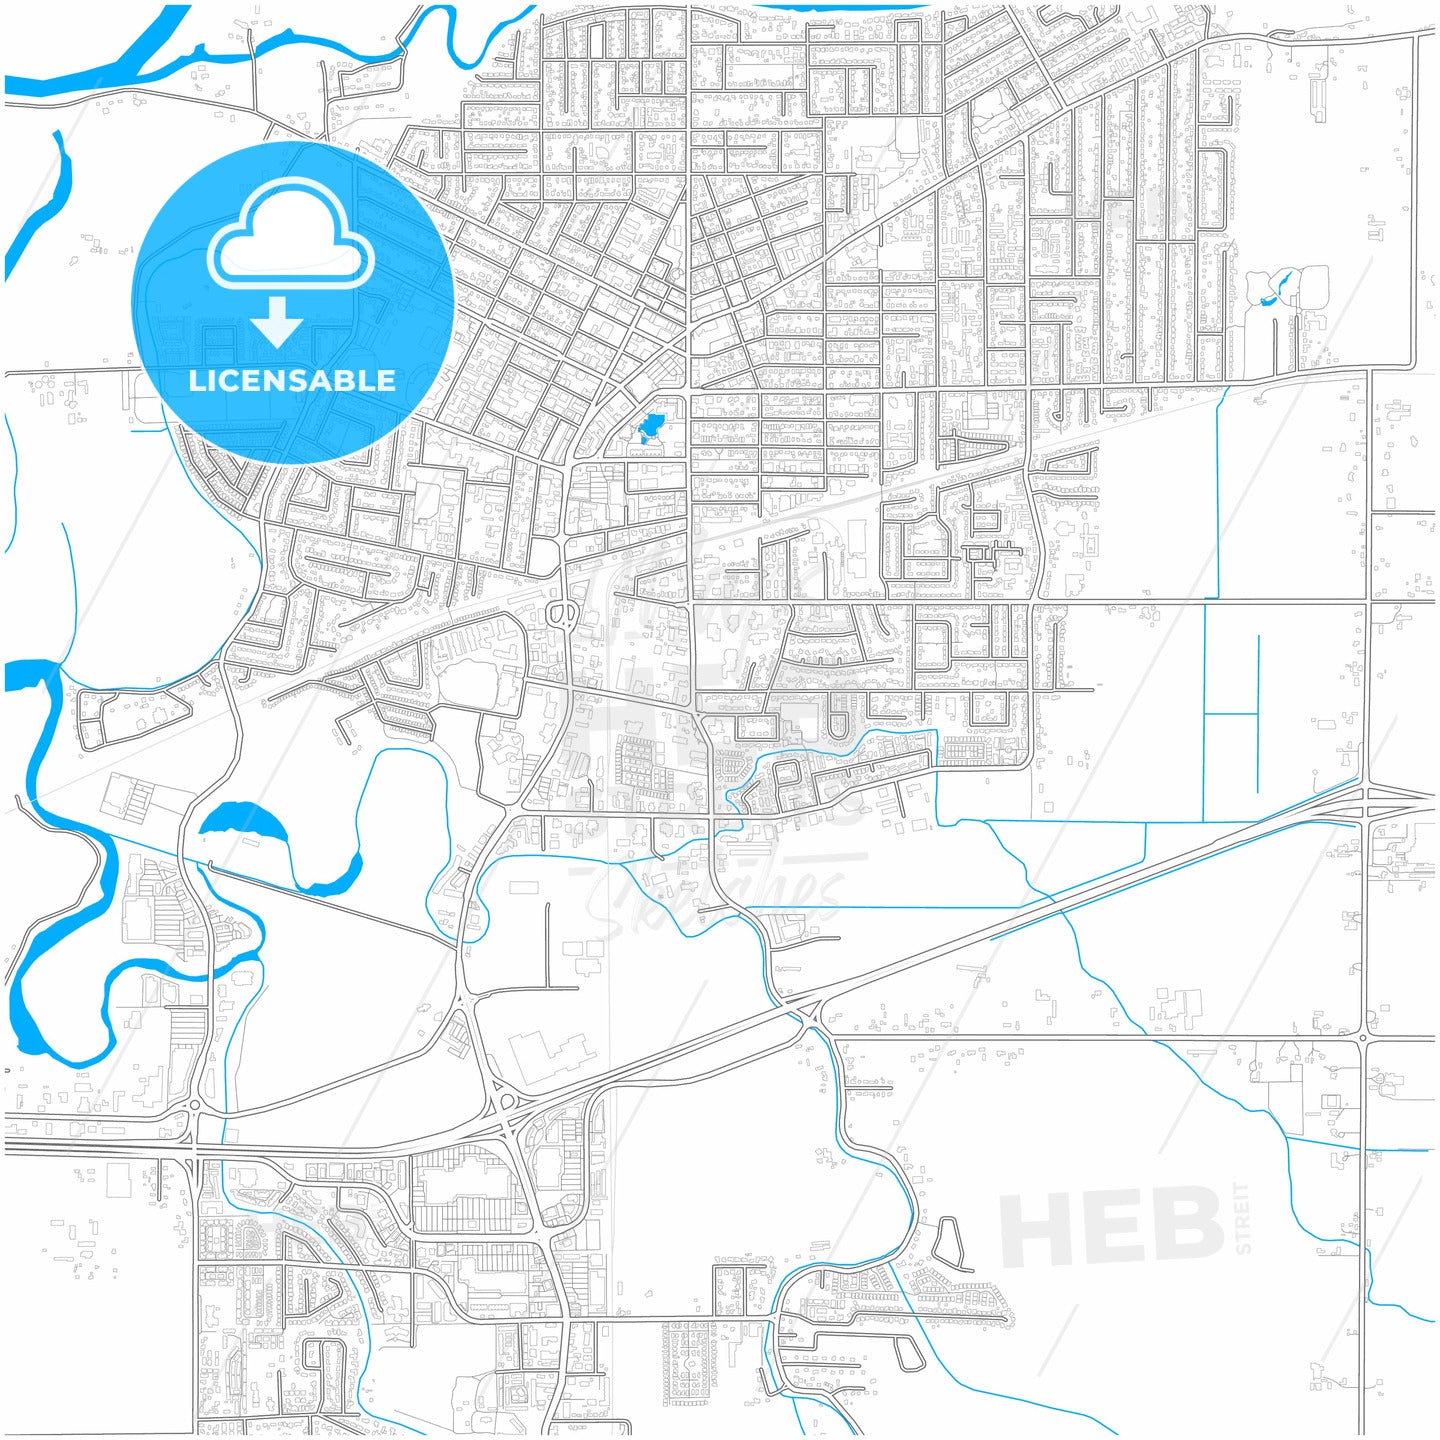 Chilliwack, British Columbia, Canada, city map with high quality roads.